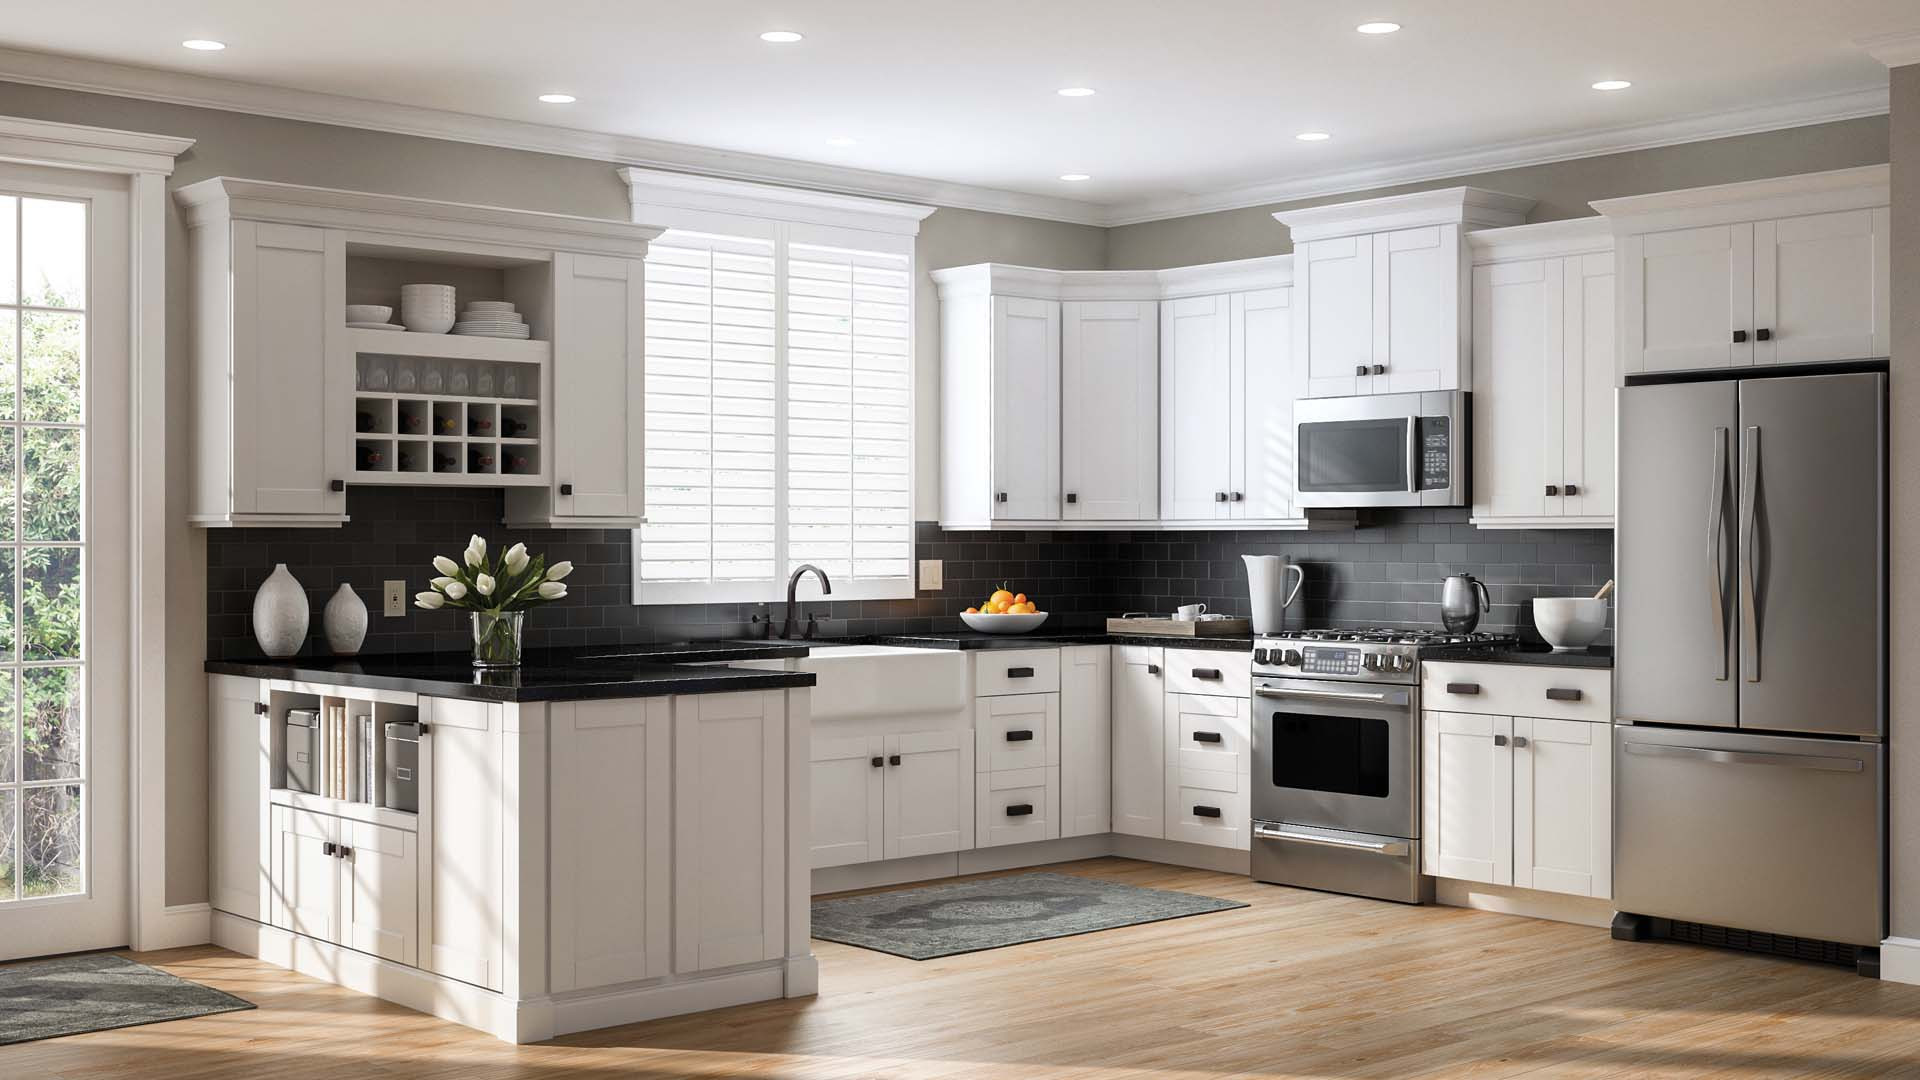 White Shaker Cabinets Kitchen
 Shaker Base Cabinets in White – Kitchen – The Home Depot